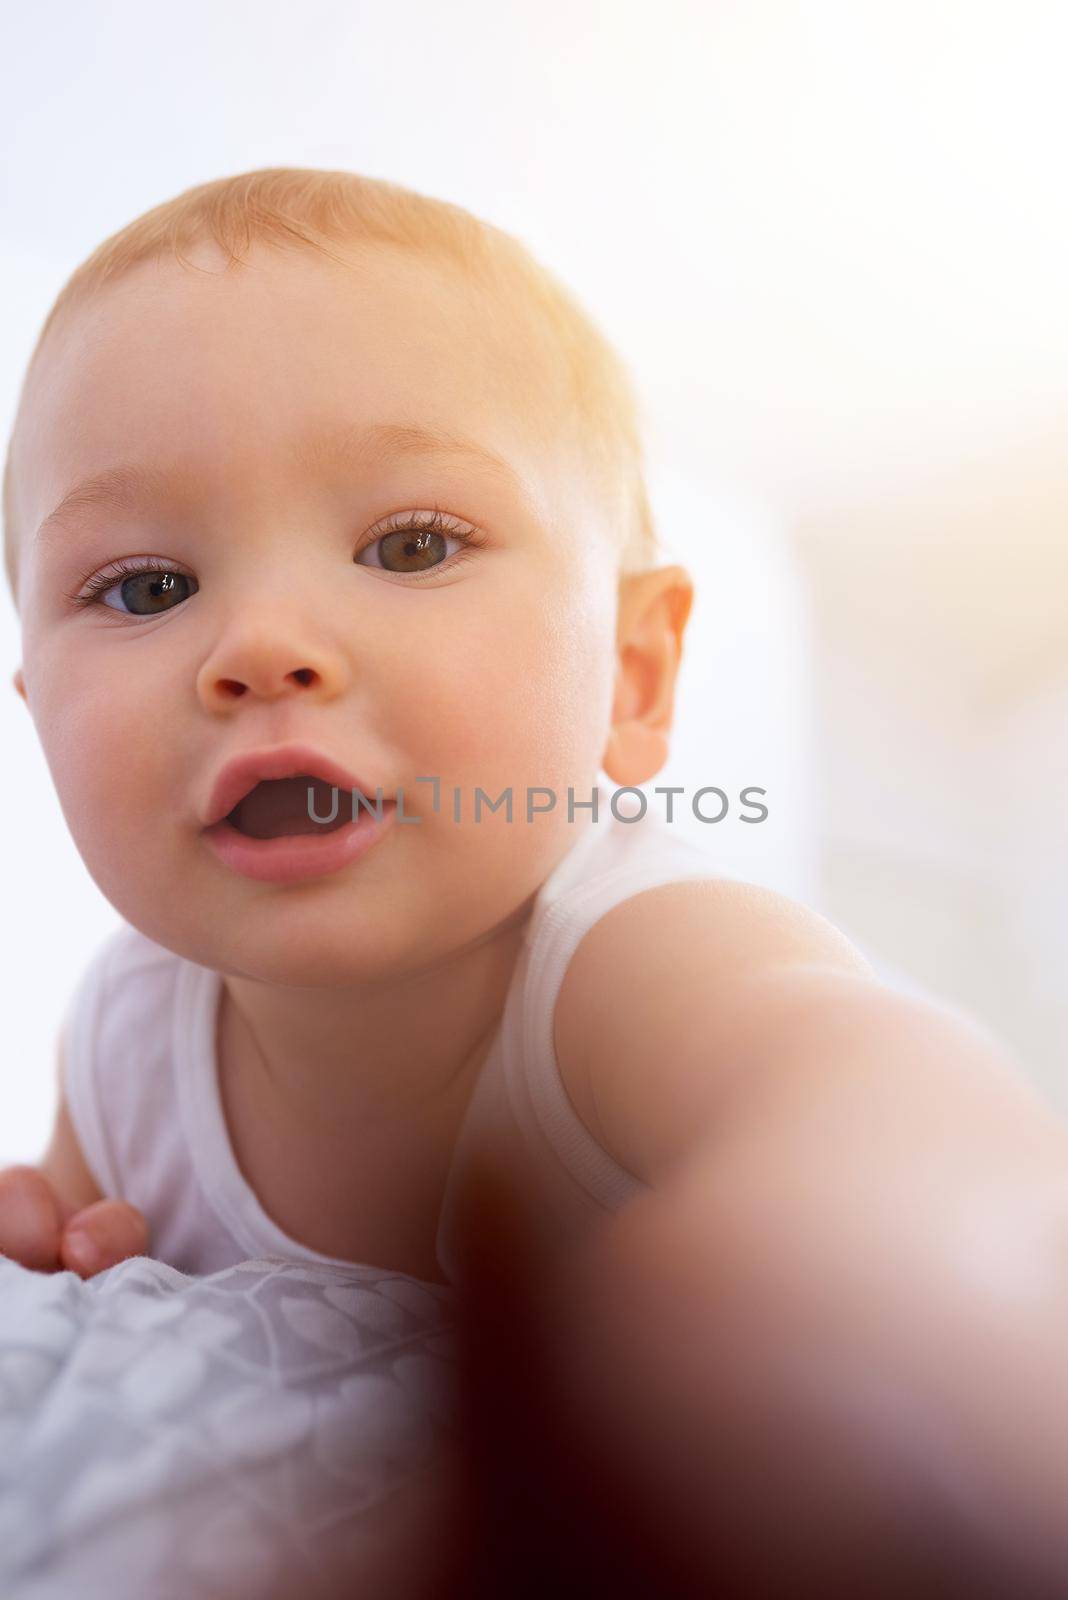 Check out my selfie skills. Portrait of an adorable little boy